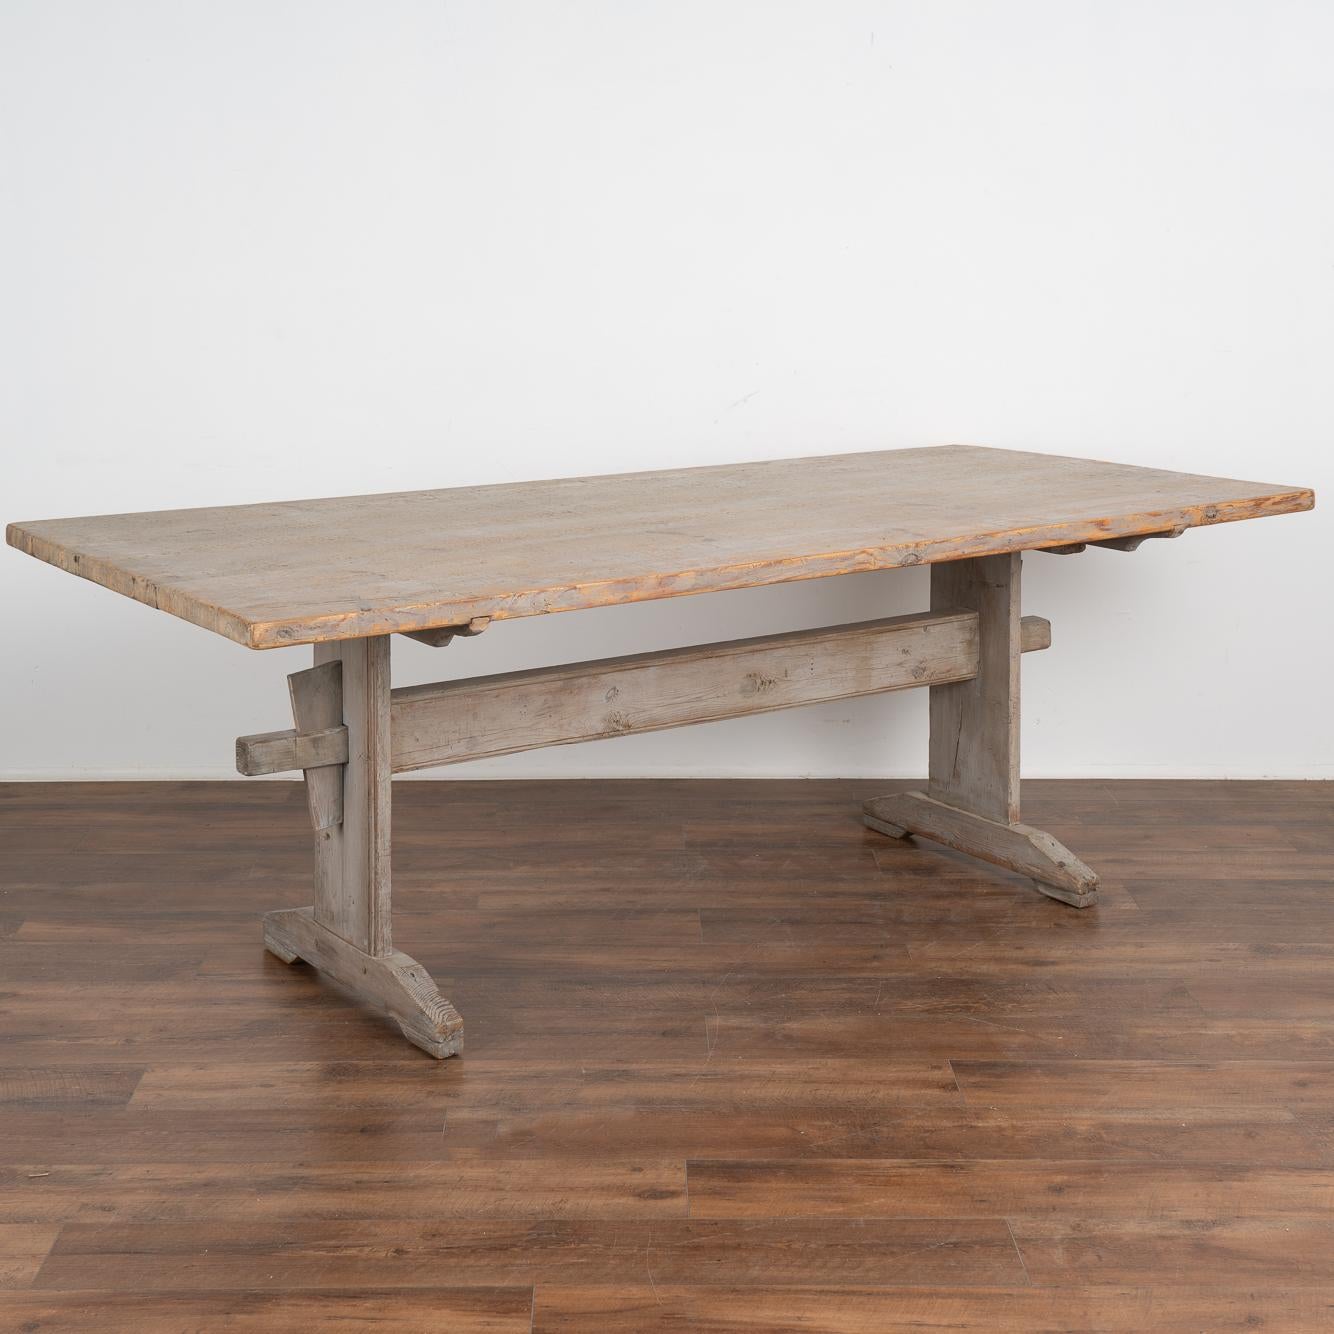 This wonderful old farm table from the Swedish countryside is a special find thanks to the original gray painted finish which has been worn down to the warm pine patina below through generations of use. 
The top is deeper than most of the era at